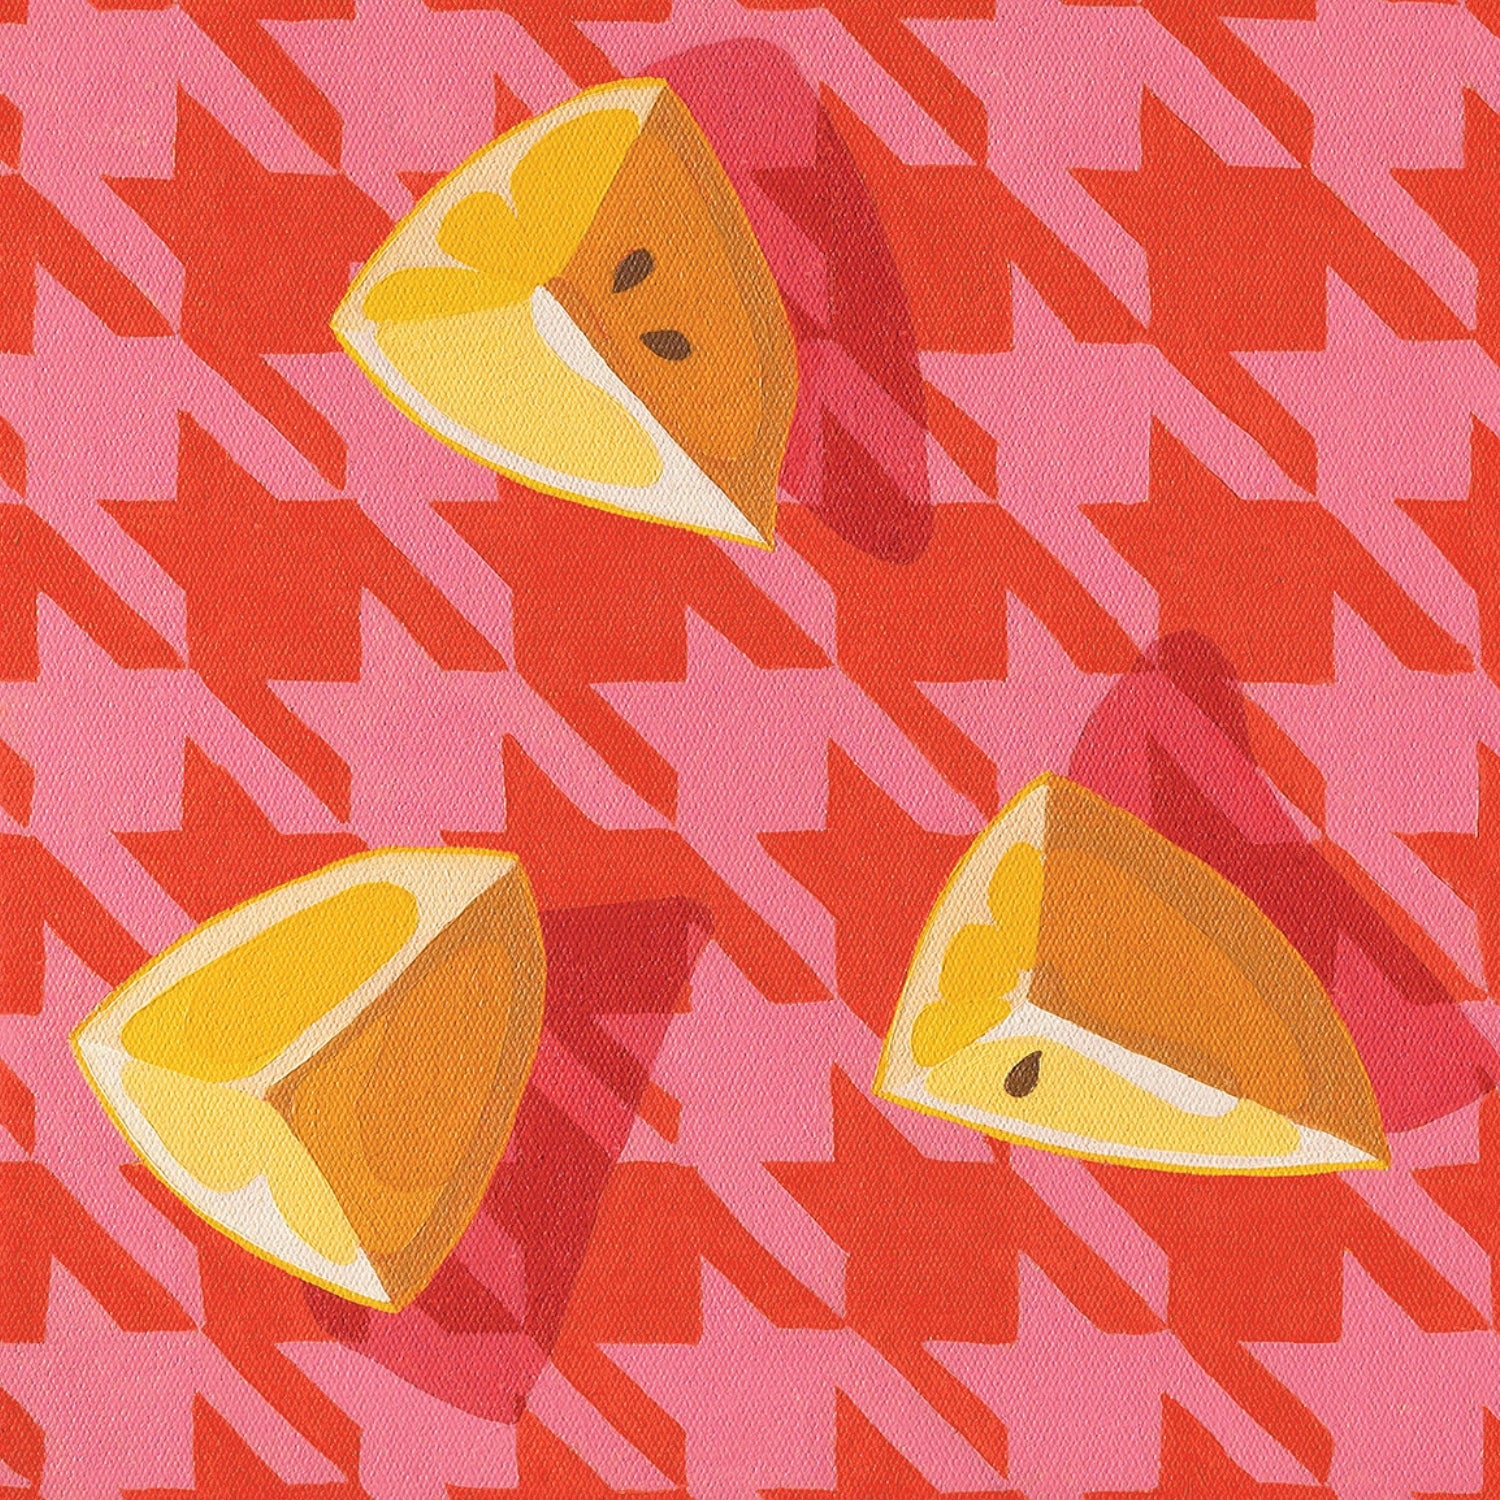 fine art print of a colorful and modern original oil painting of bright and vibrant yellow lemons on a pink and red houndstooth background with shadows